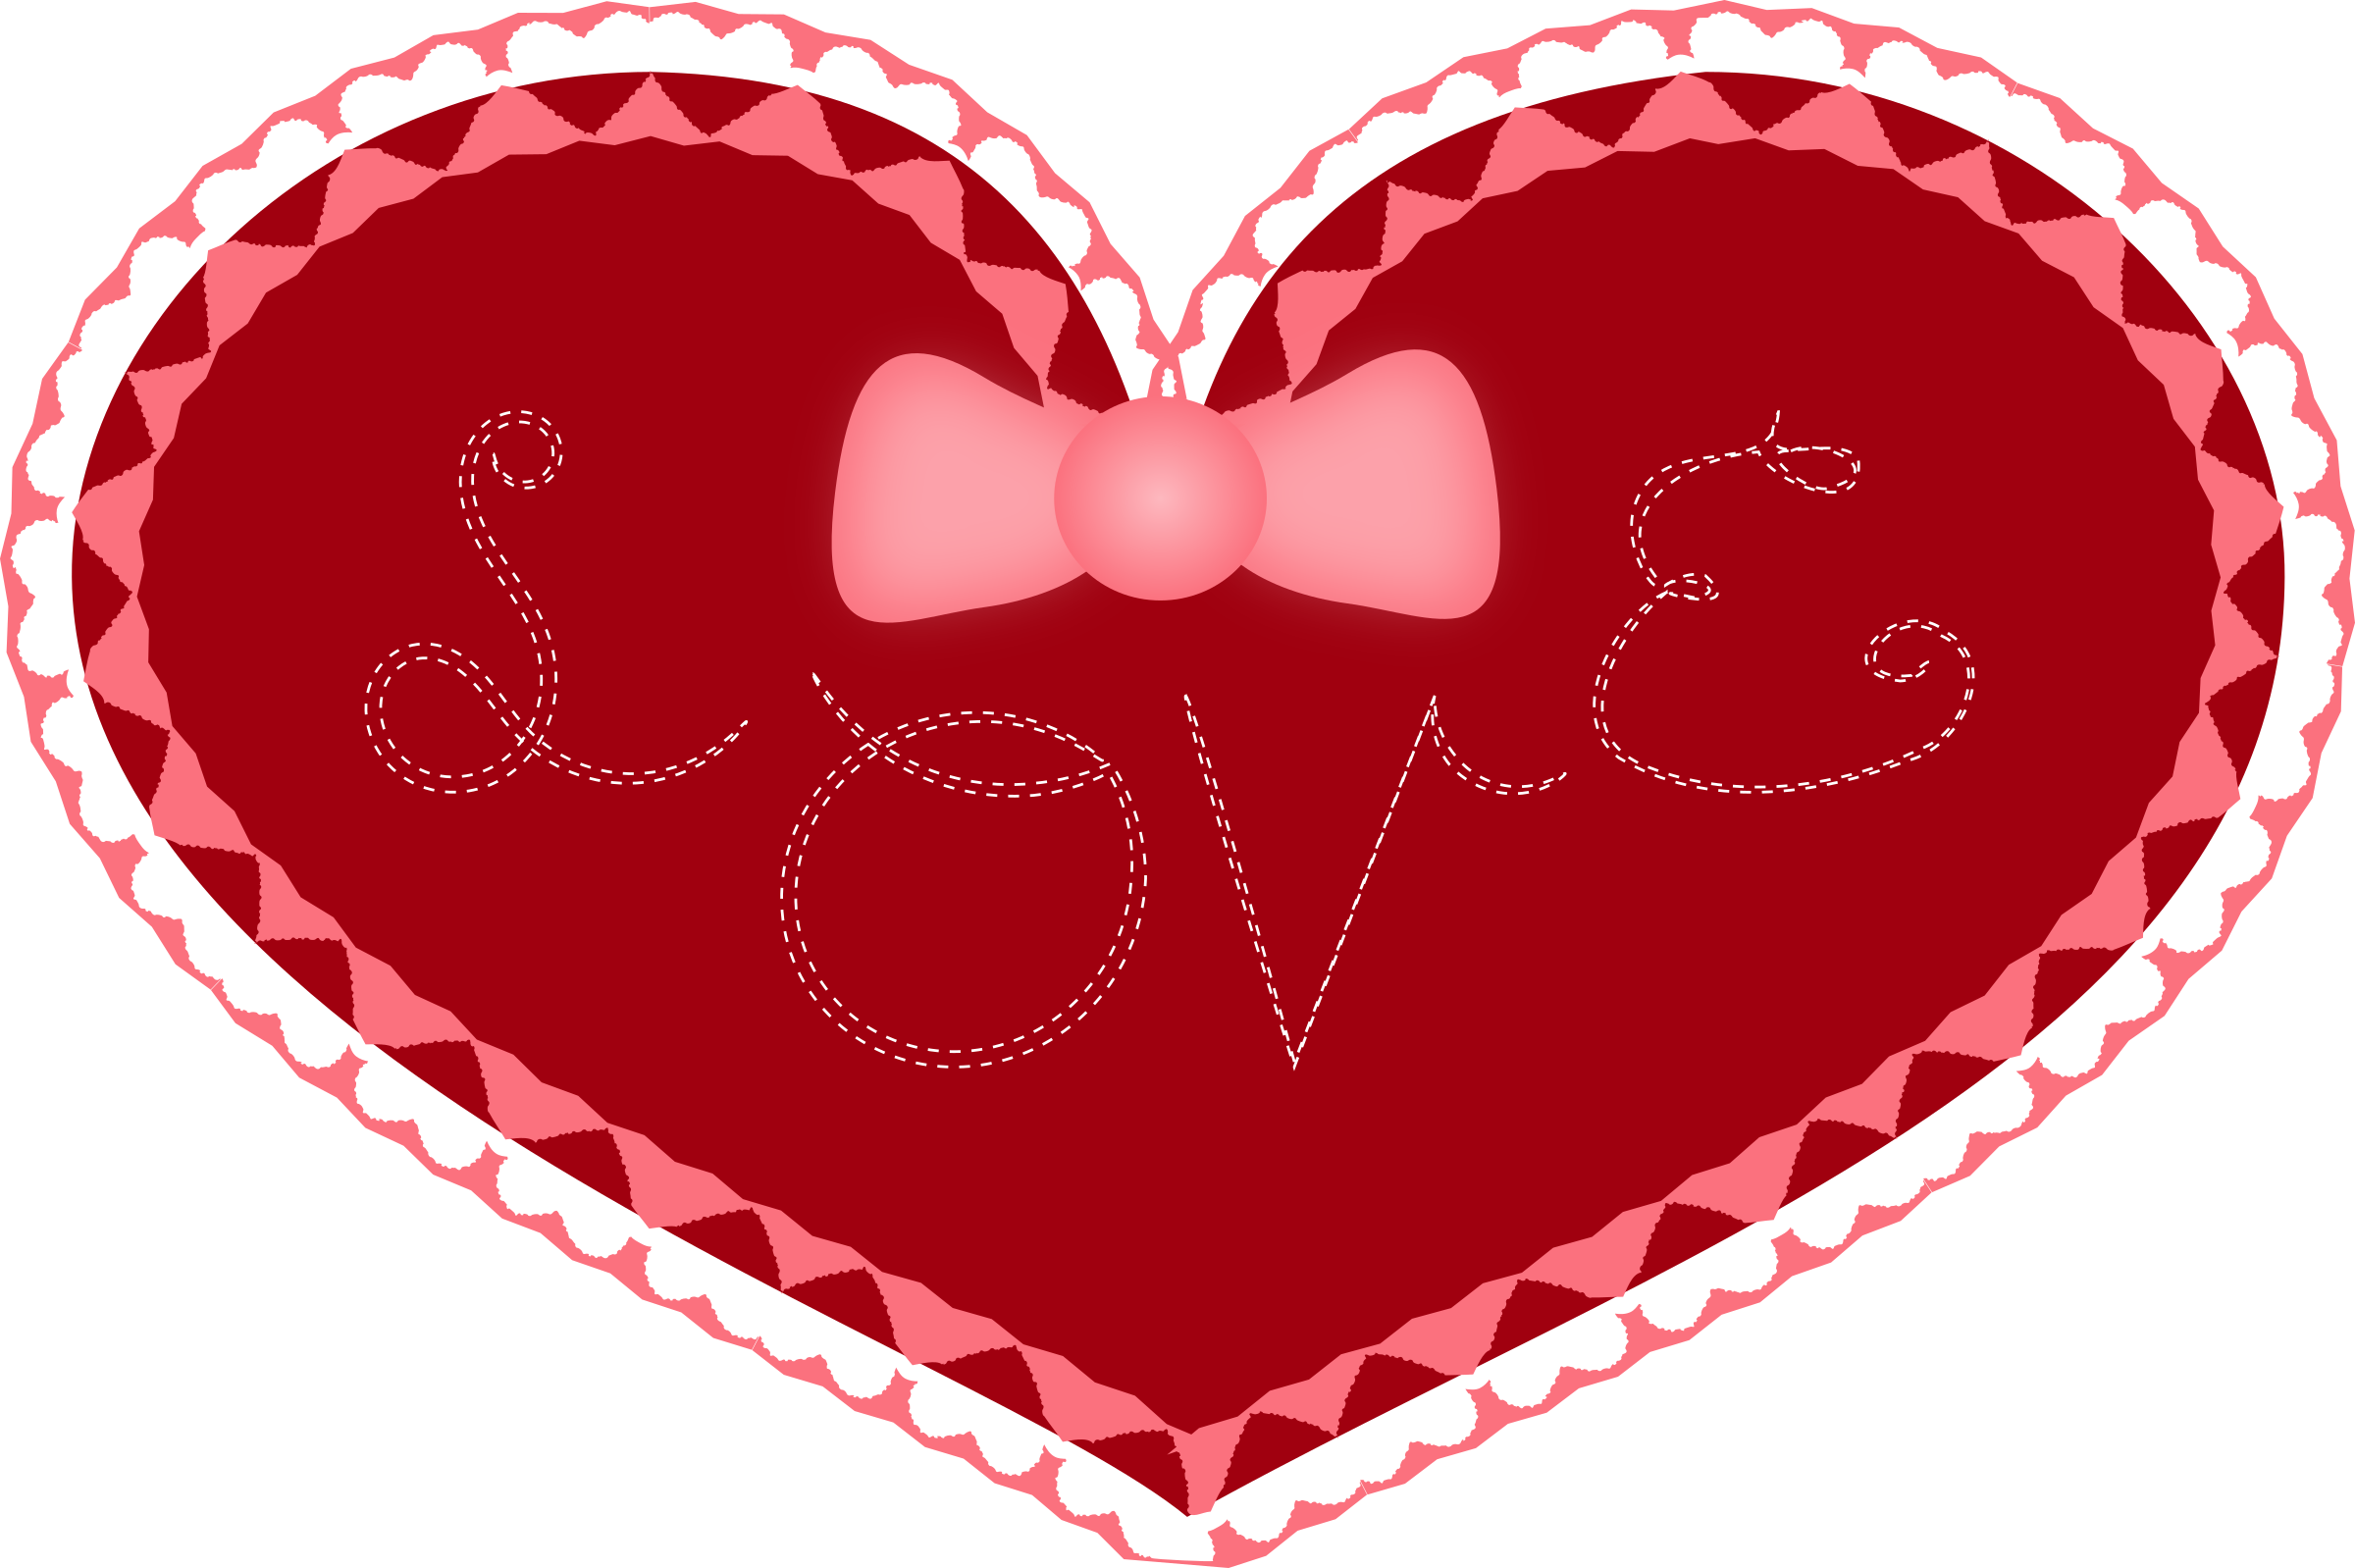 Happy Valentines Day Animated Clipart | Free download best Happy Valentines Day ...2400 x 1598